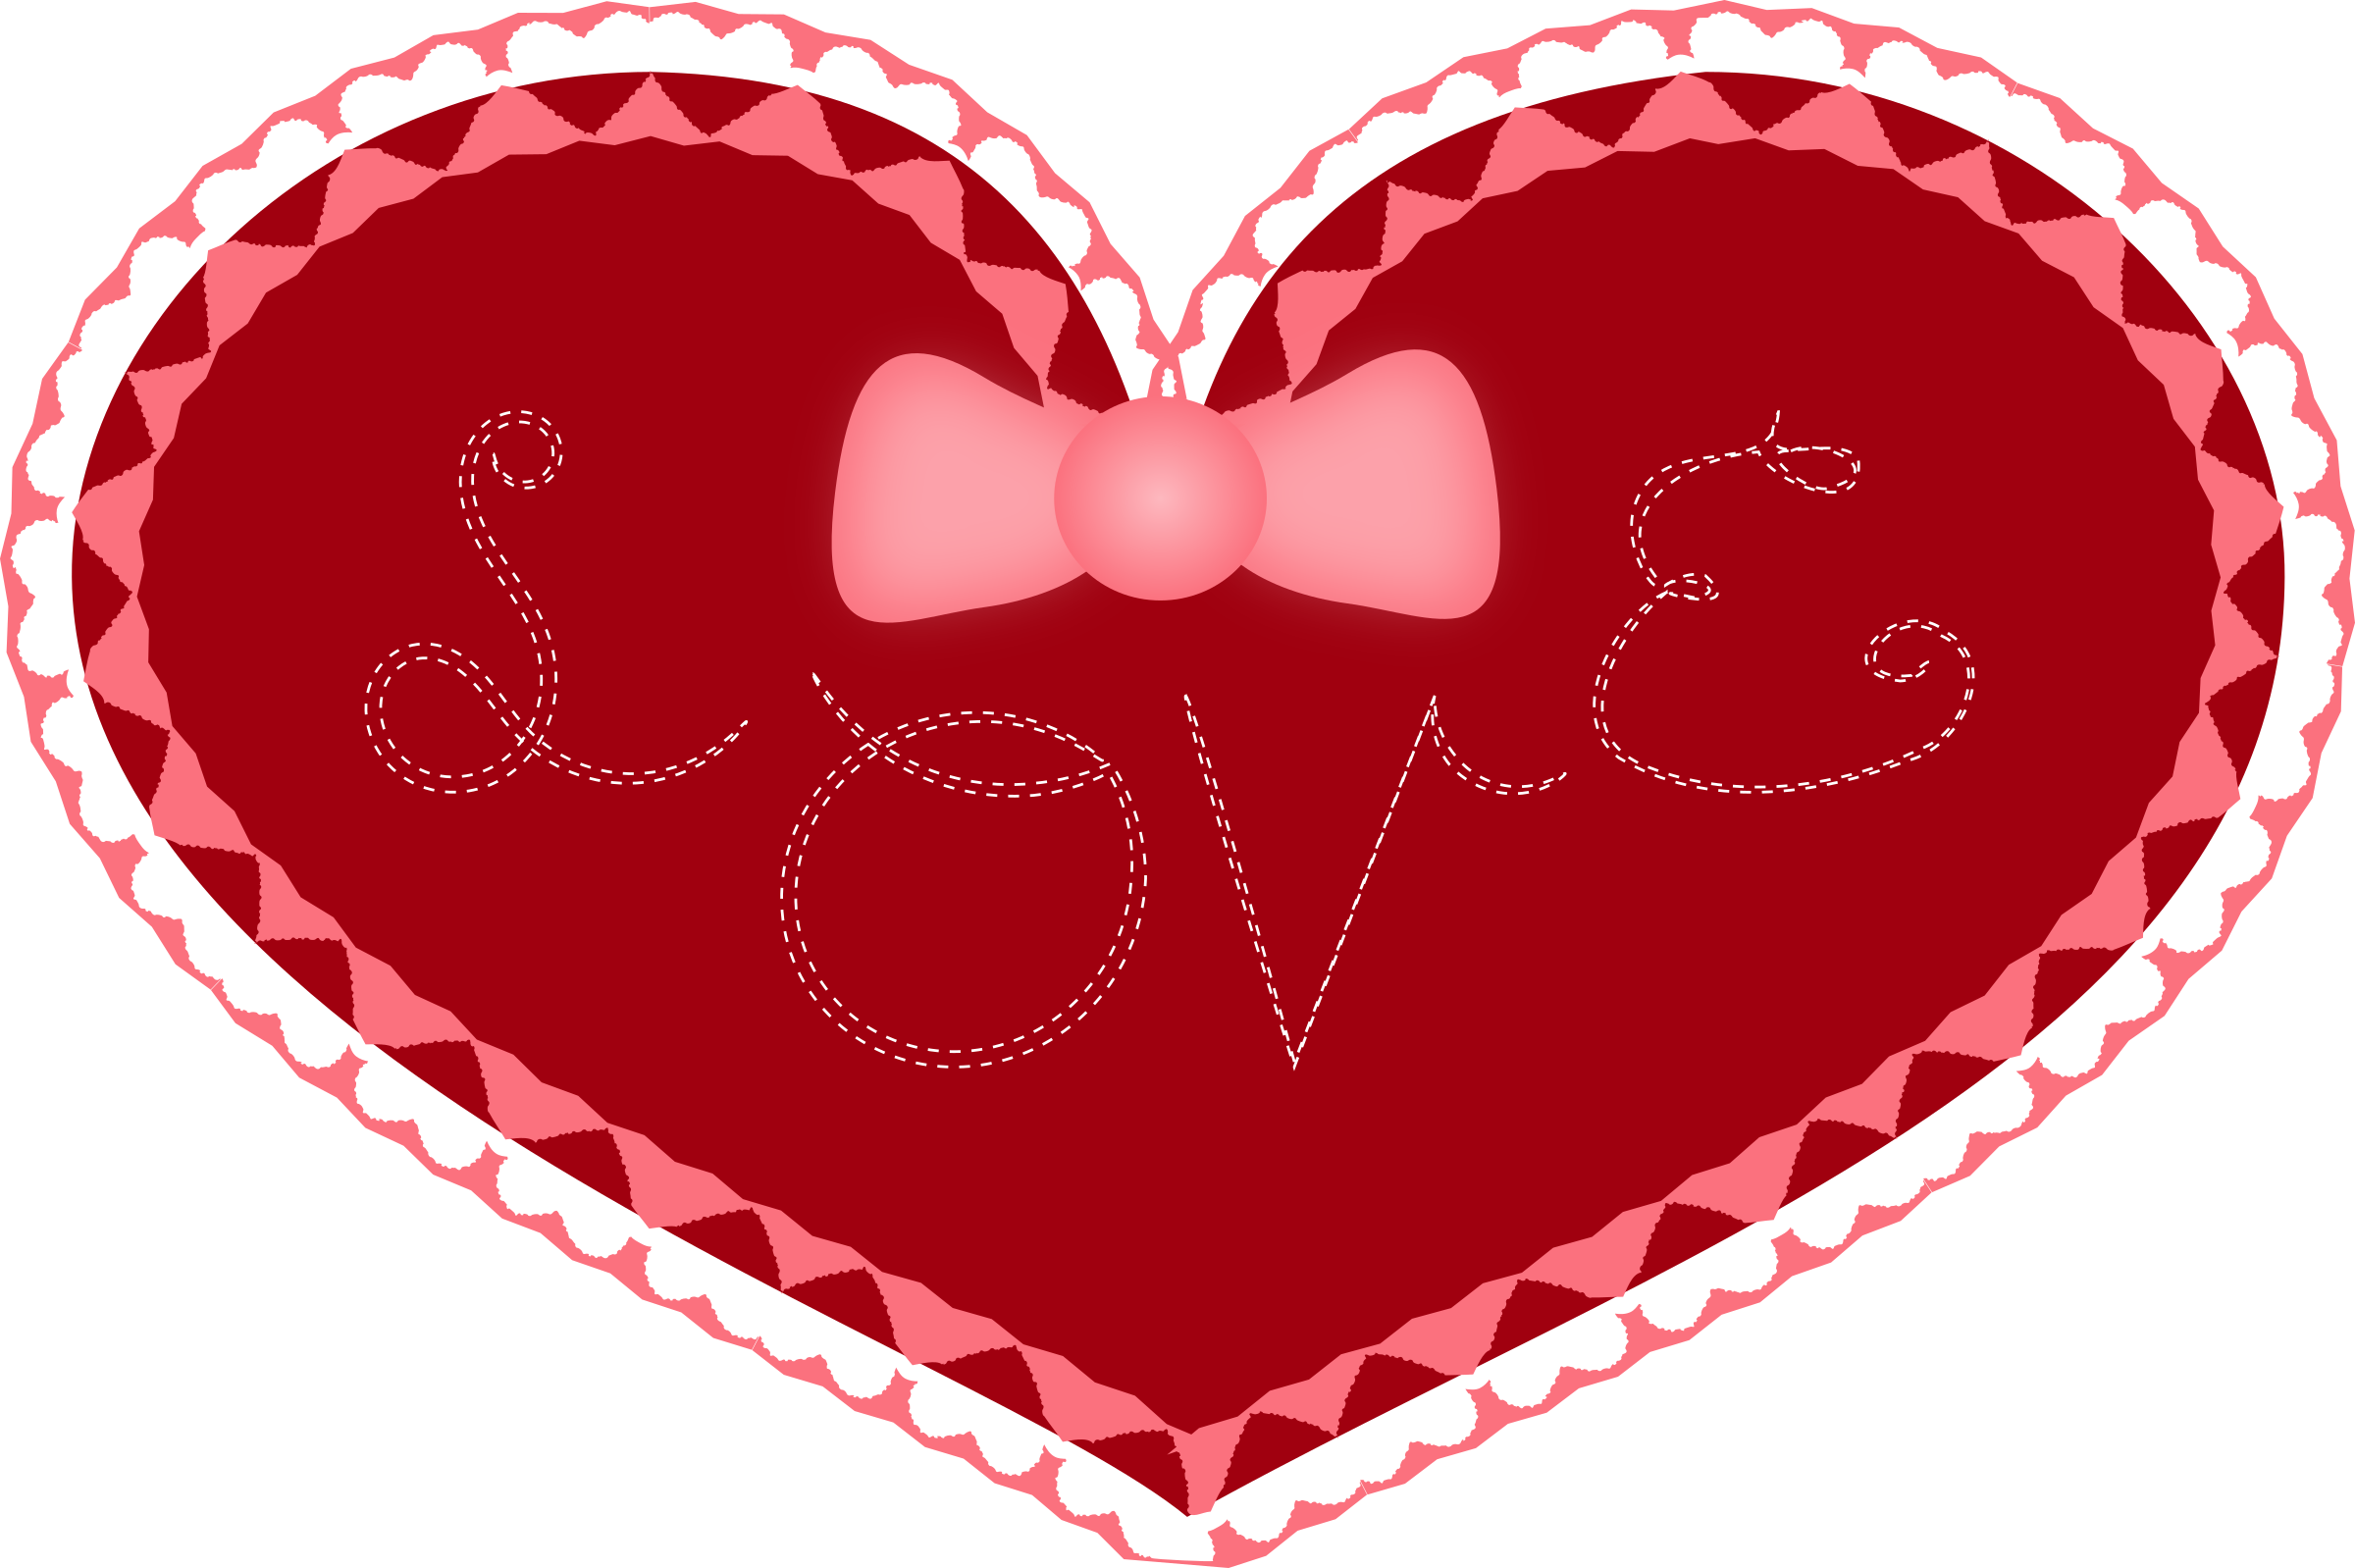 Happy Valentines Day Animated Clipart | Free download best Happy Valentines Day ...2400 x 1598